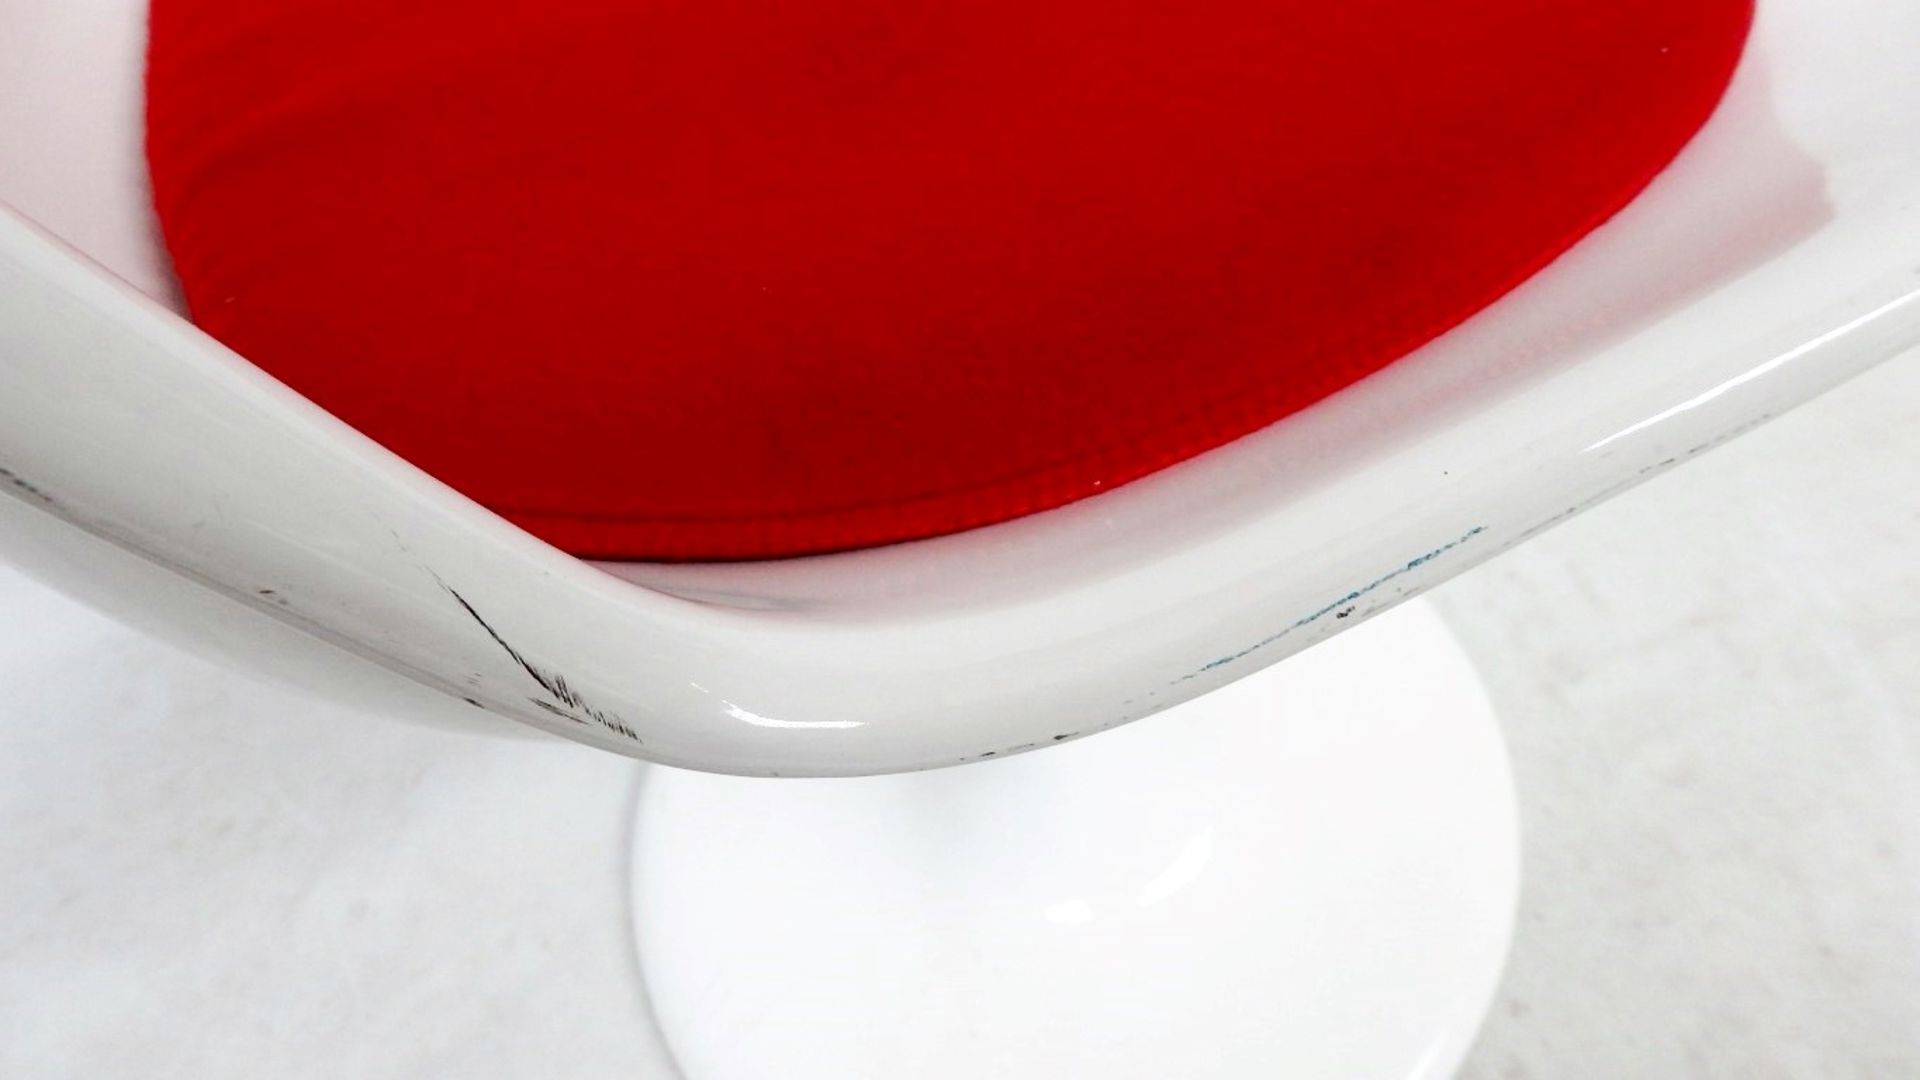 1 x Retro Style Swivel Chair With A White Hi-gloss Finish - Includes Cushion As Shown - - Image 5 of 7